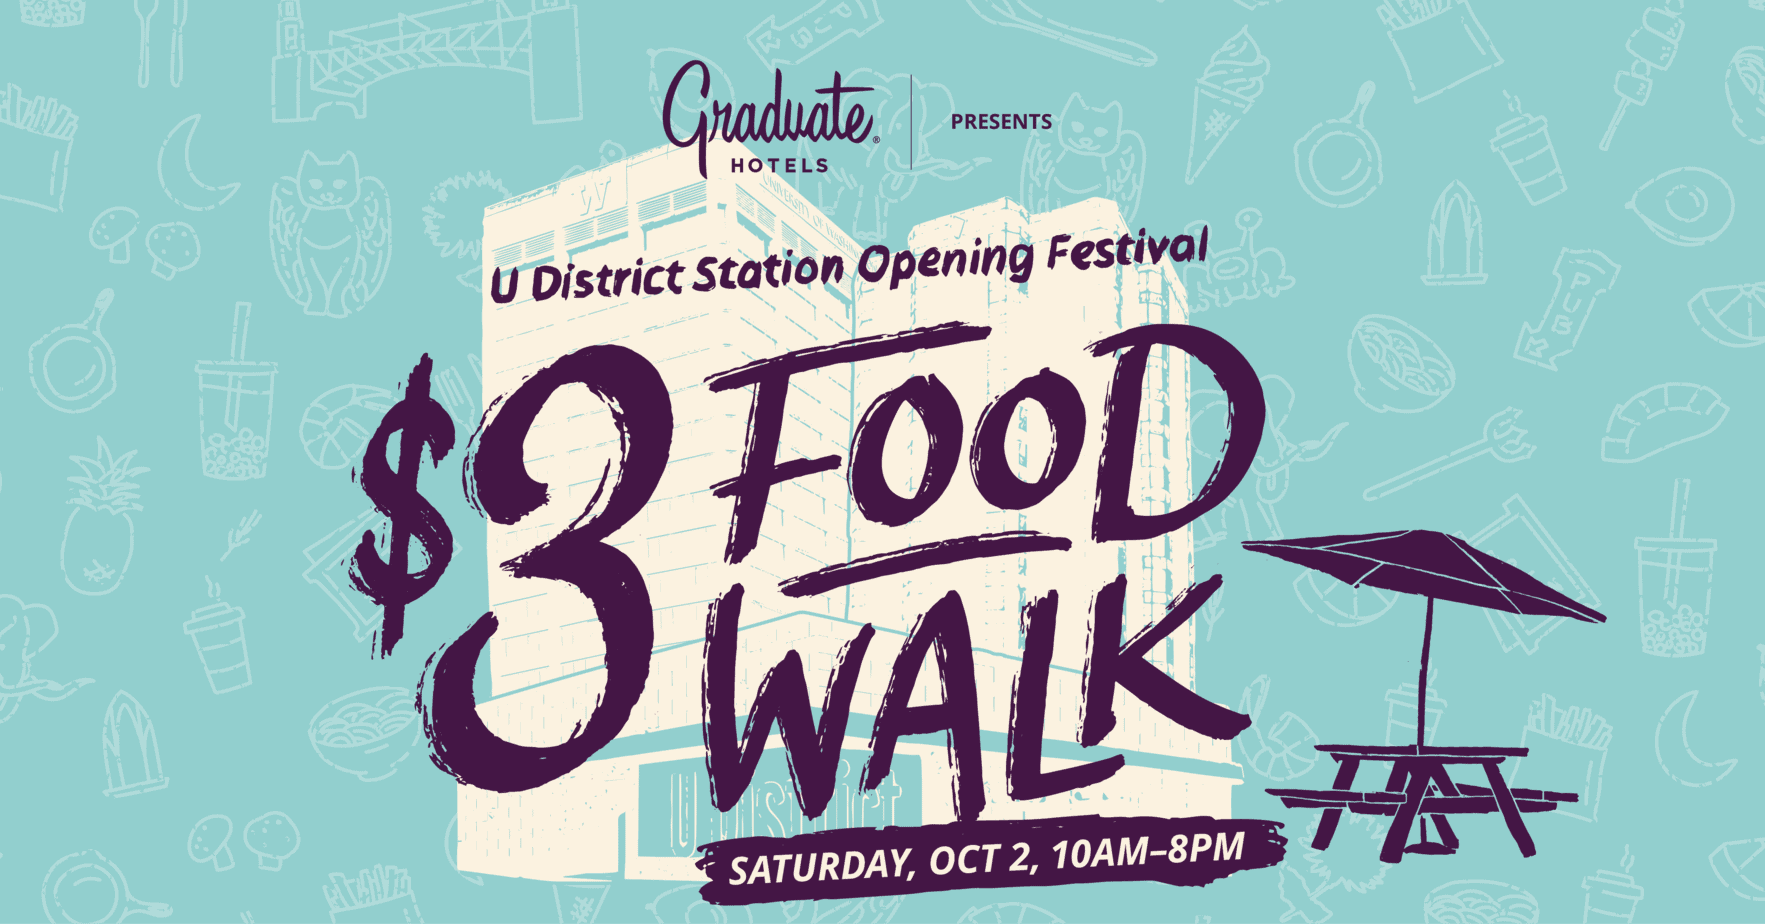 Graphic image showcasing the U District Station Opening Festival and $3 Food Walk event on Saturday, October 2, from 10 a.m. to 8 p.m. Image shows a picnic table bench and umbrella, with two U District area towers shown in a stylized graphic with other food, drink and fun artwork shown in the background.